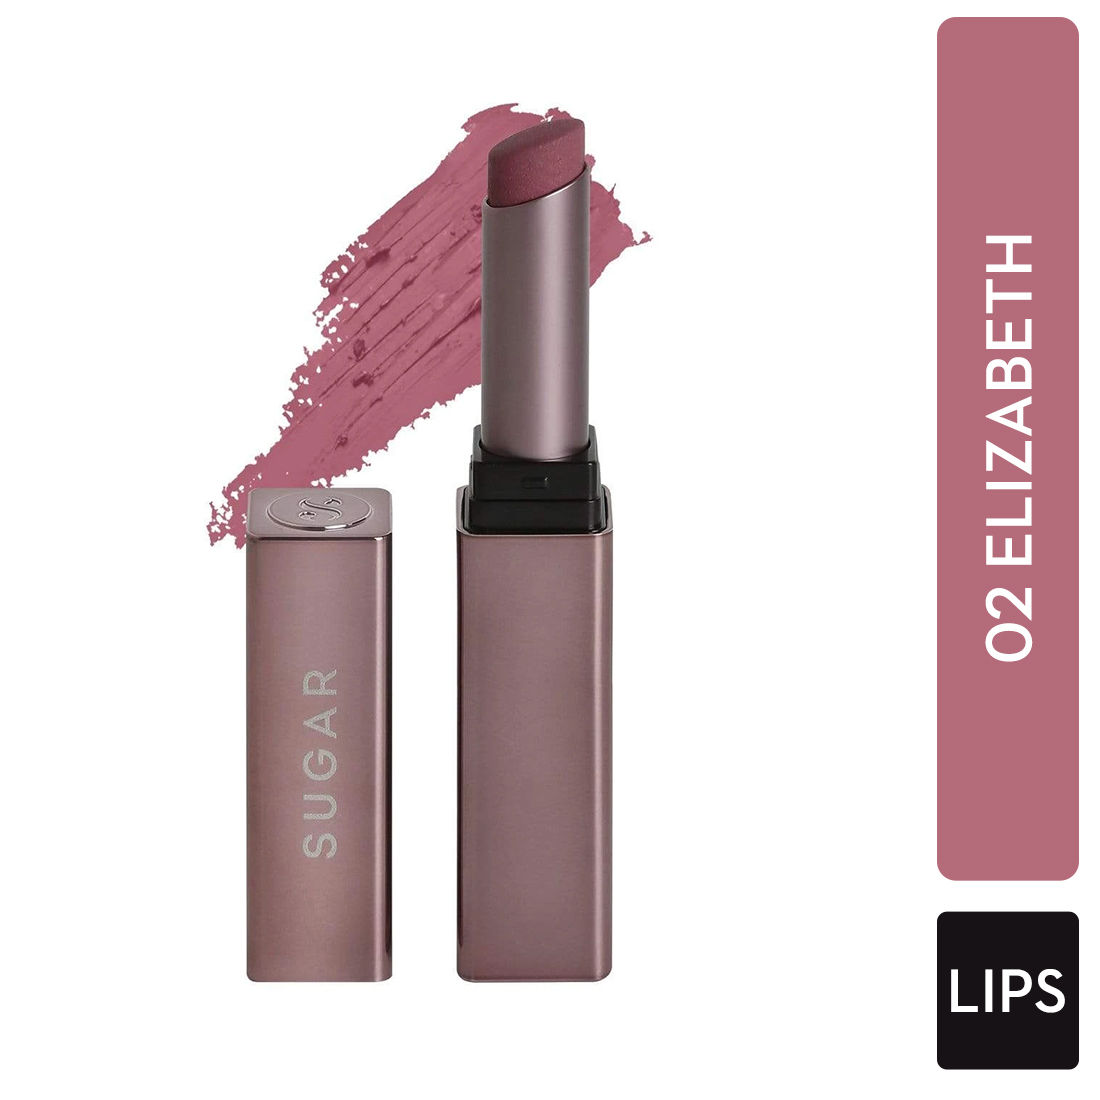 Buy SUGAR Cosmetics - Mettle - Satin Lipstick - 02 Elizabeth (Rosy Cheeks Pink) - 2.2 gms - Waterproof, Longlasting Lipstick for a Silky and Creamy Finish, Lasts Up to 8 hours - Purplle